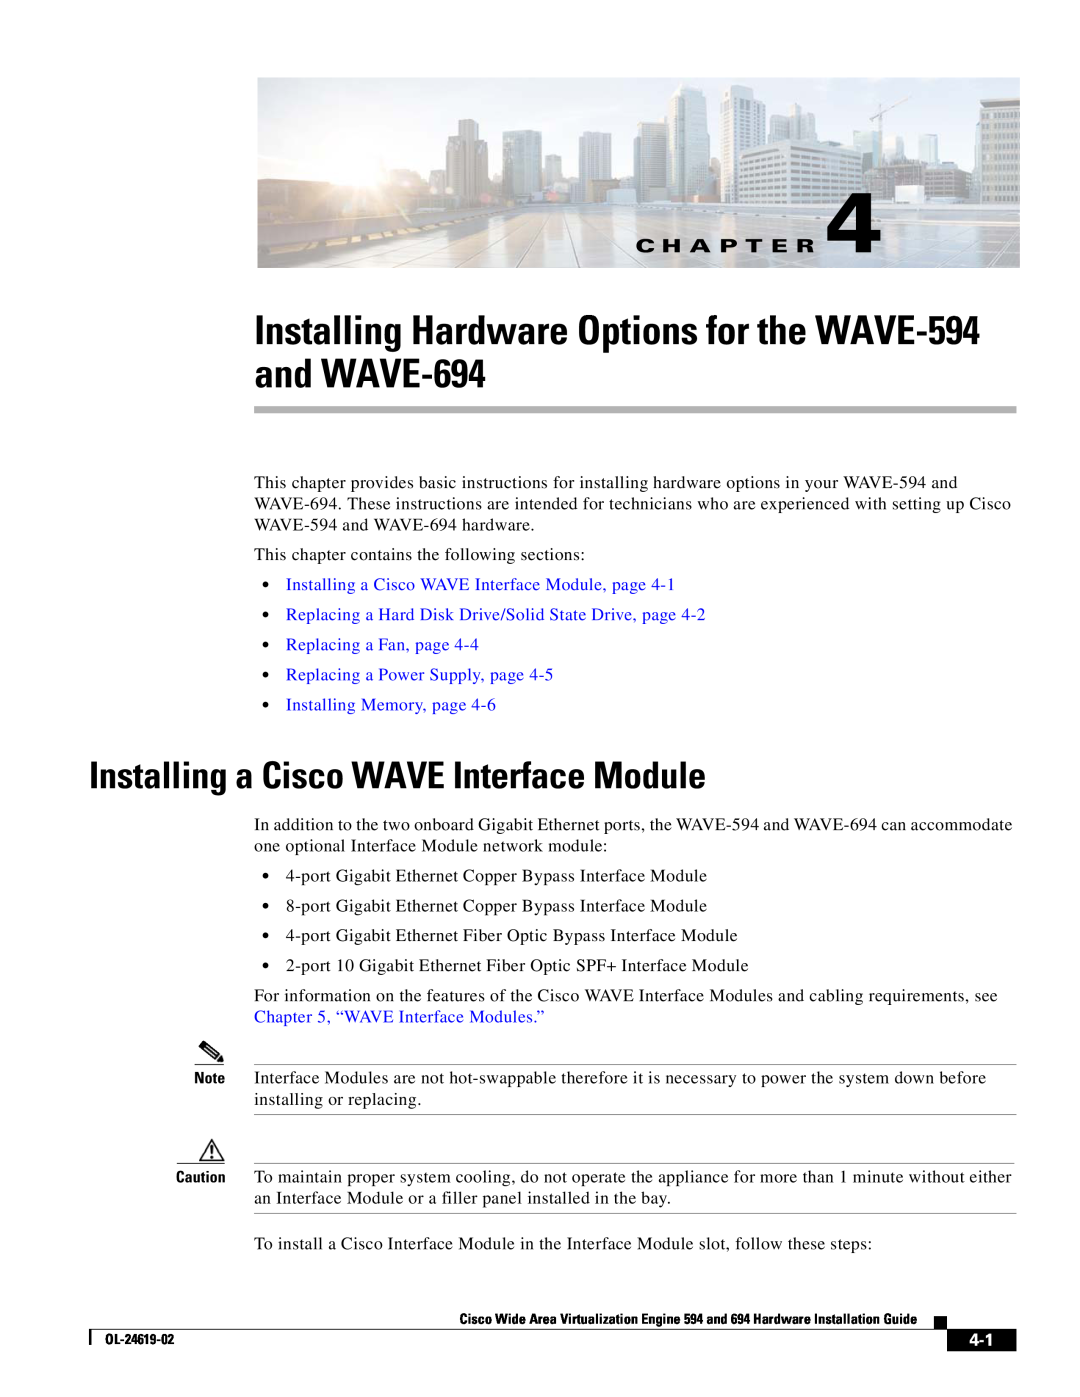 Cisco Systems manual Installing Hardware Options for the WAVE-594 and WAVE-694, Installing a Cisco WAVE Interface Module 